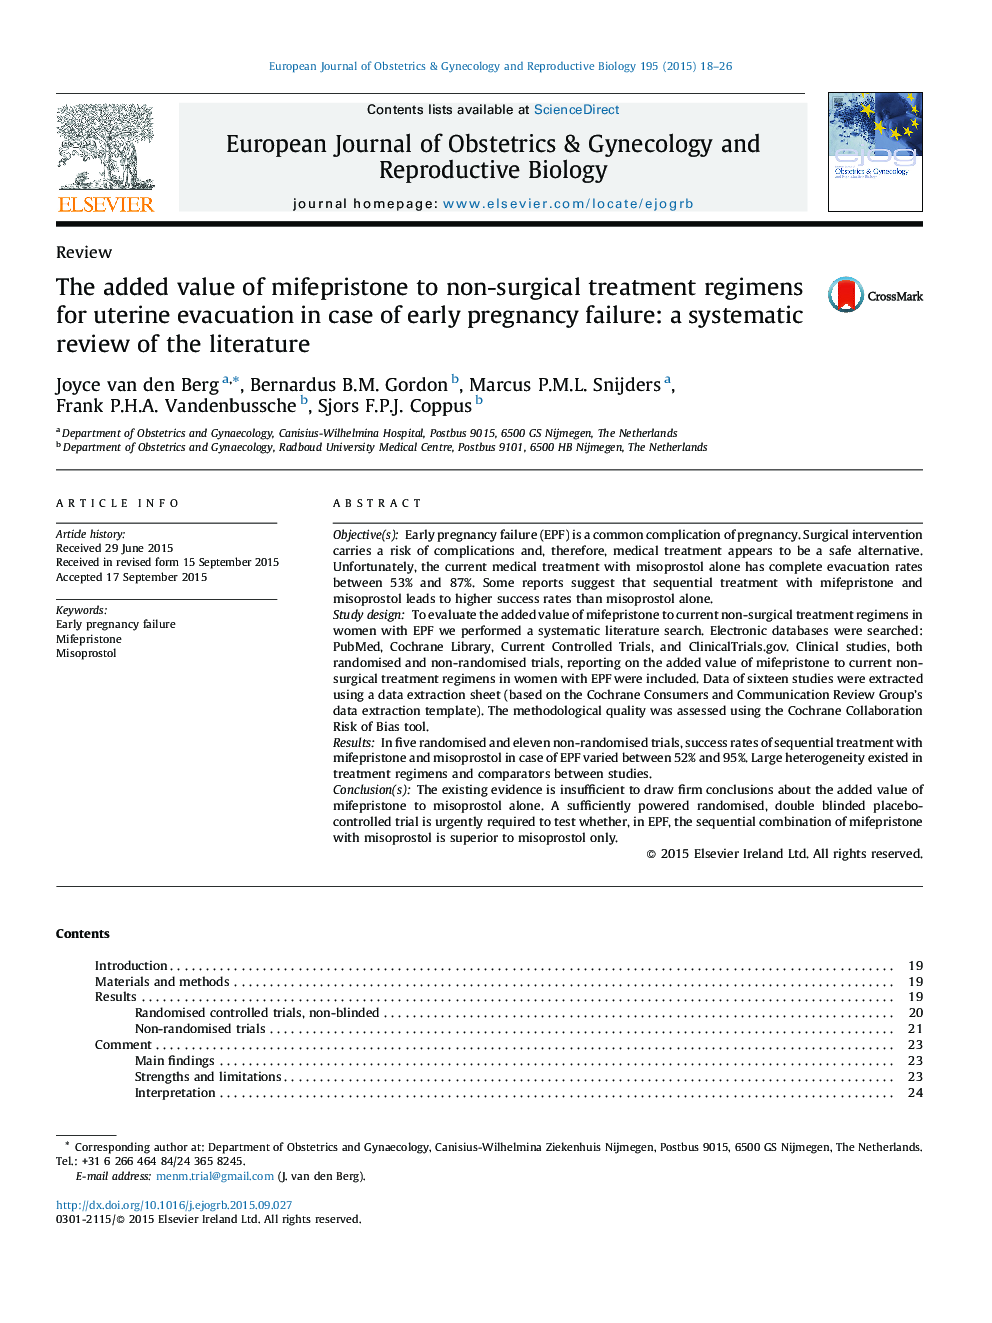 The added value of mifepristone to non-surgical treatment regimens for uterine evacuation in case of early pregnancy failure: a systematic review of the literature